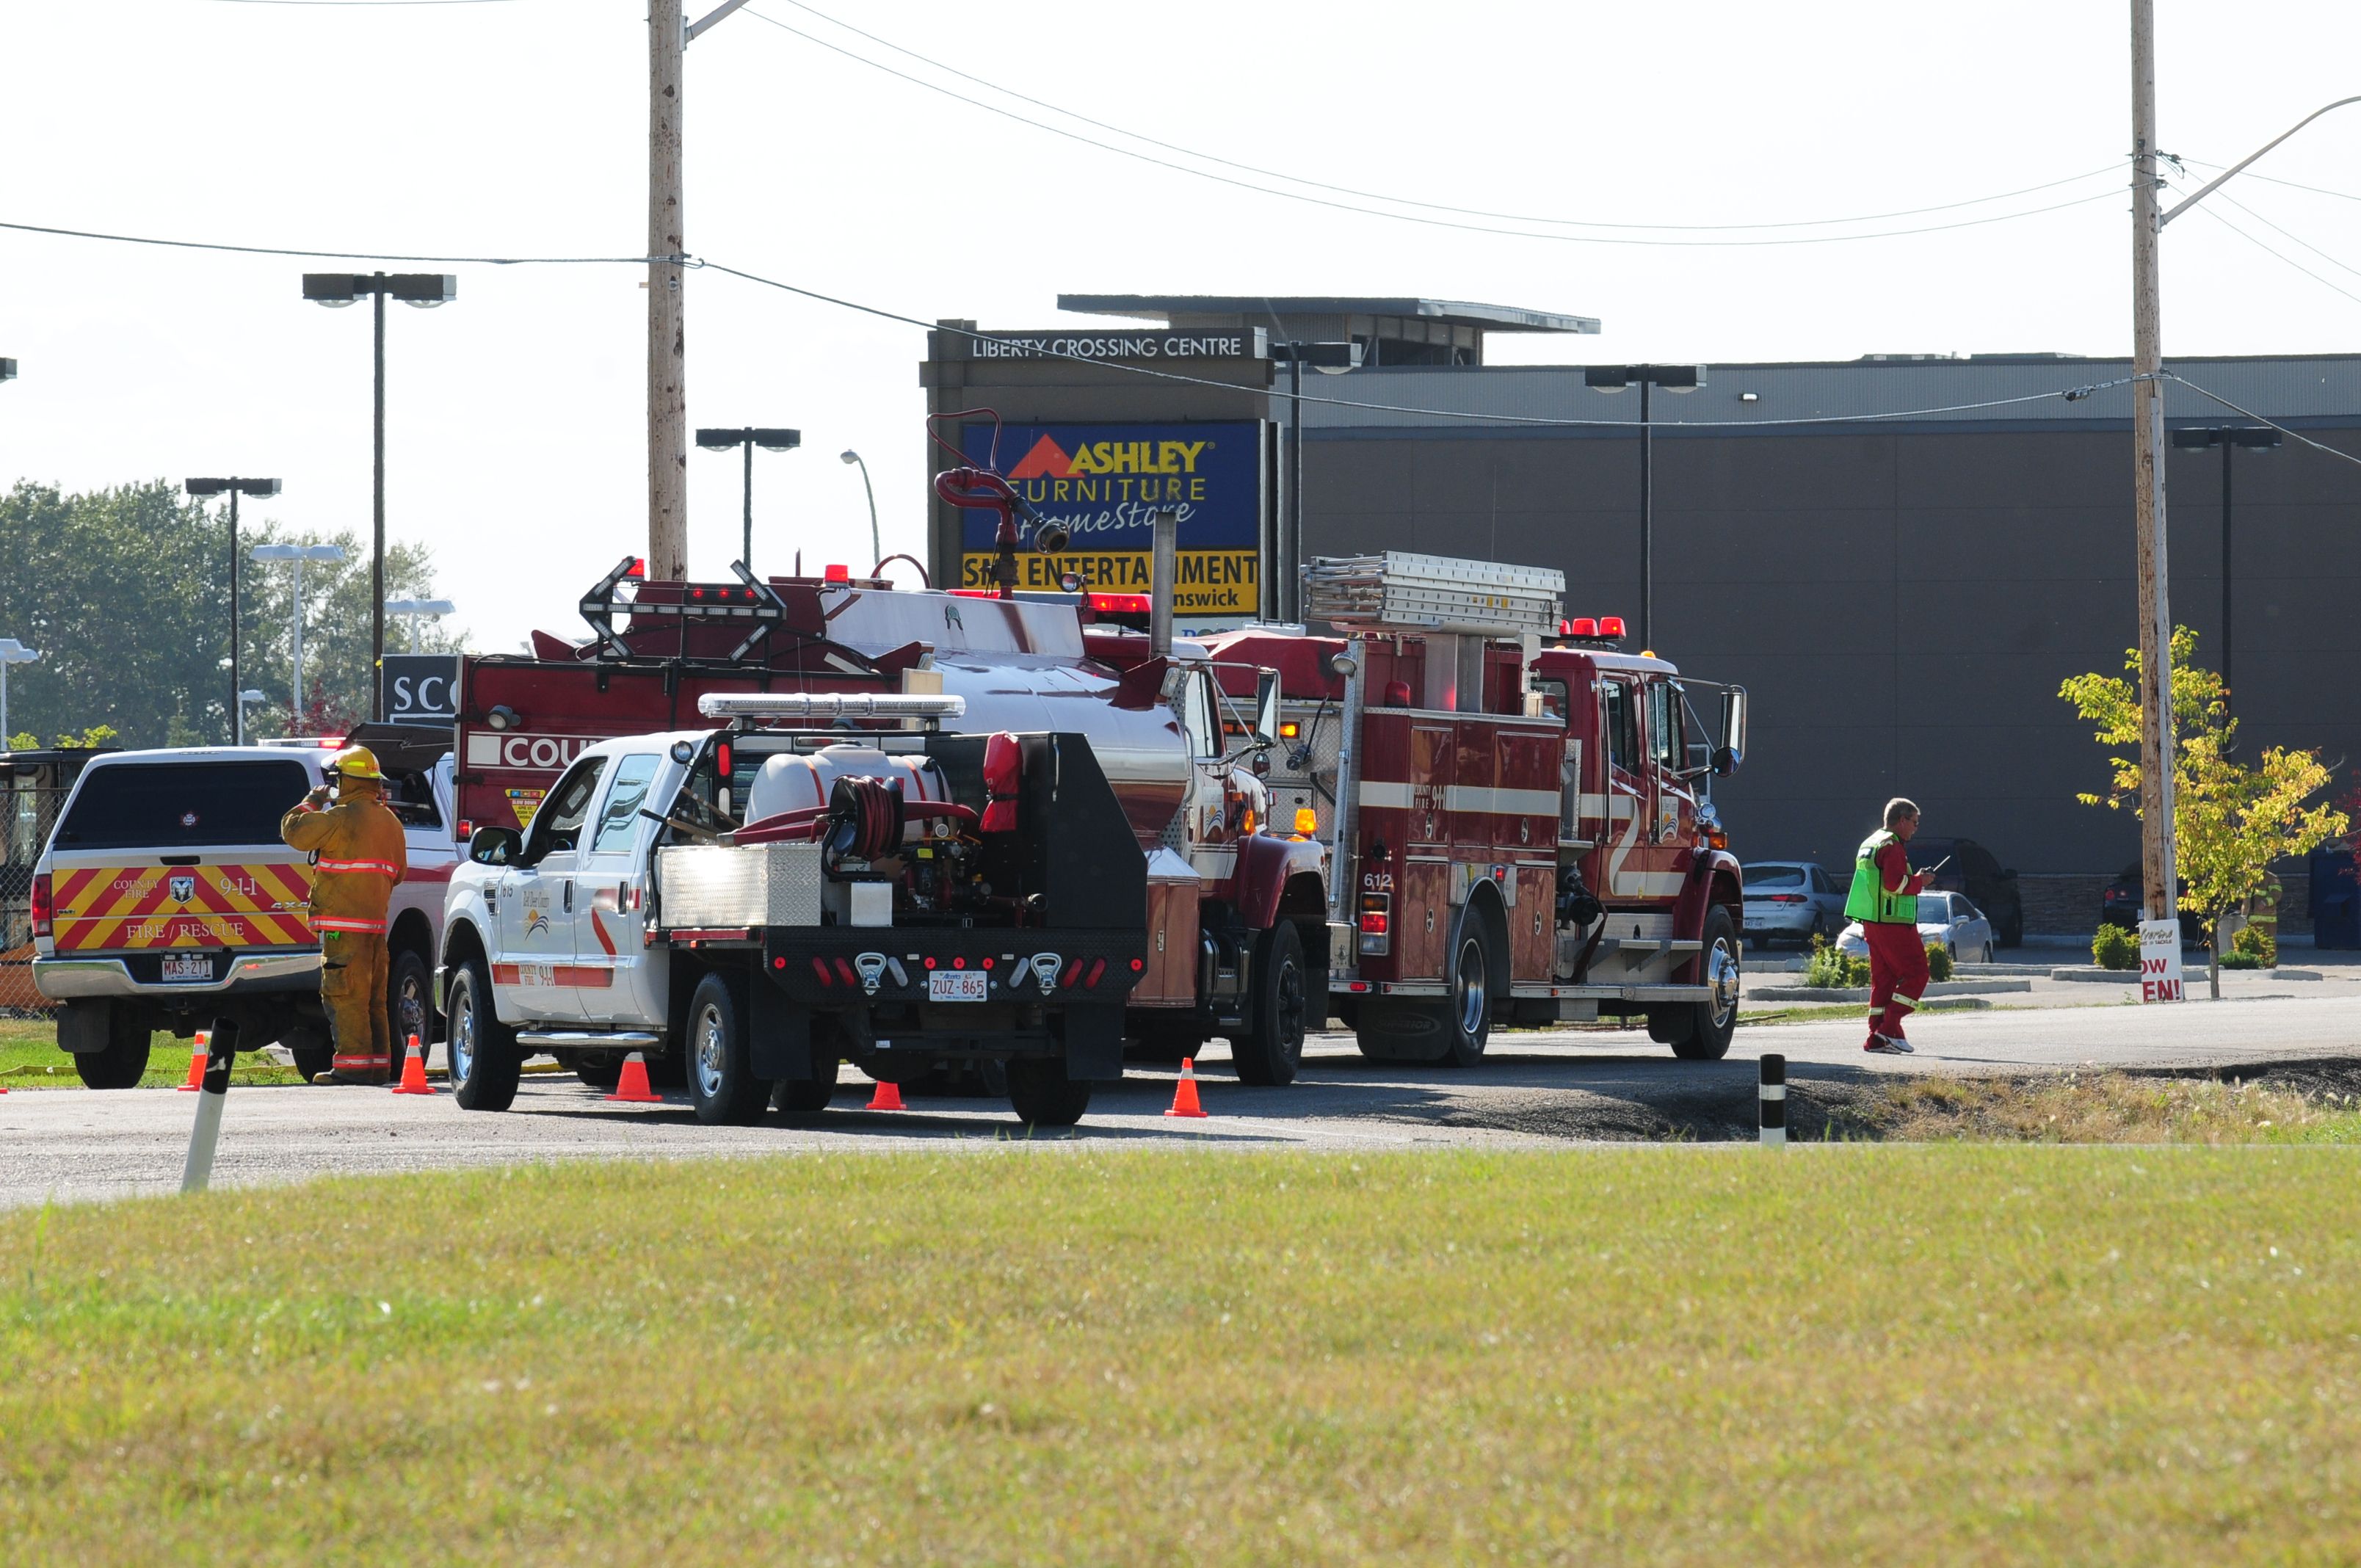 LEAK- Emergency crews along with ATCO Gas were on scene at Gasoline Alley yesterday afternoon around Ashley Furniture where a gas line was struck. Buildings in the area were evacuated as crews worked to stop the leak.